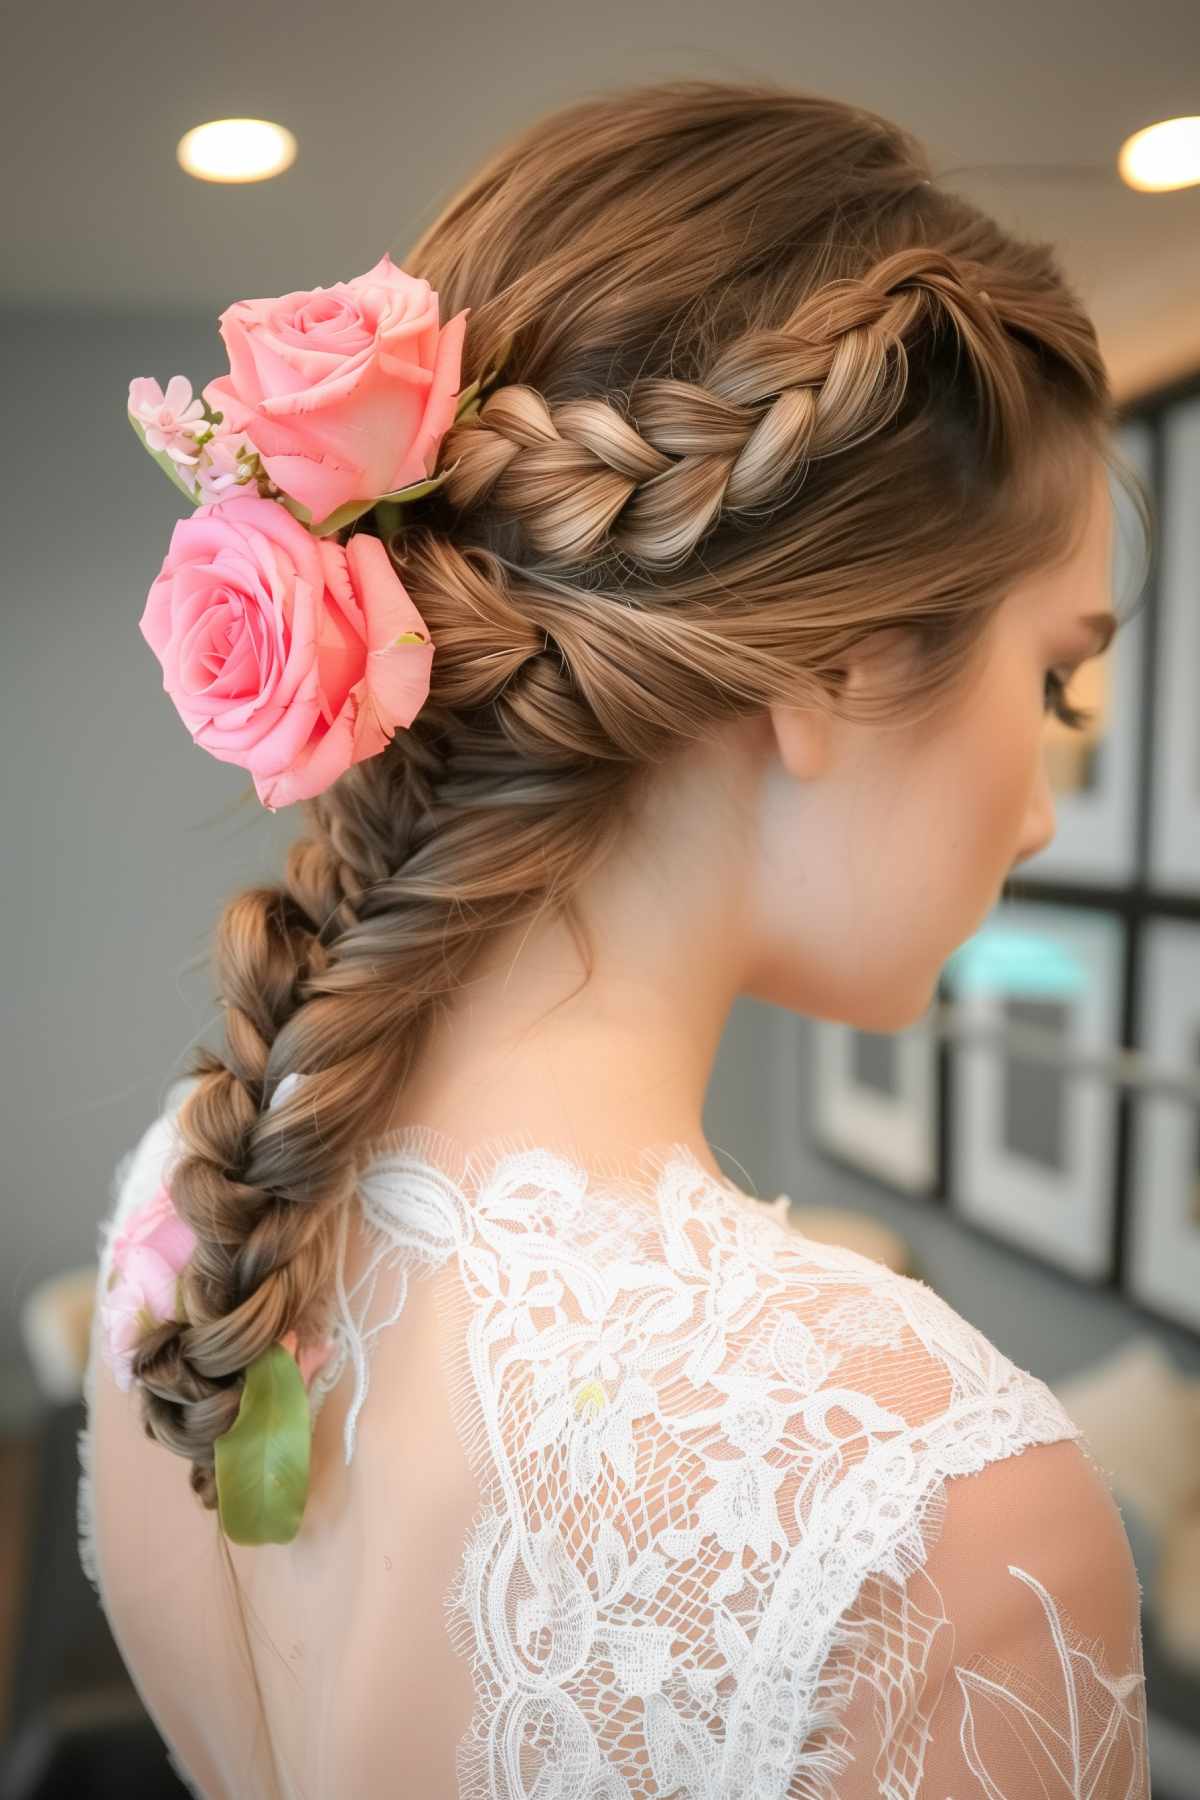 Elegant fishtail braid with pink roses woven through, styled on a bride with medium-length hair.